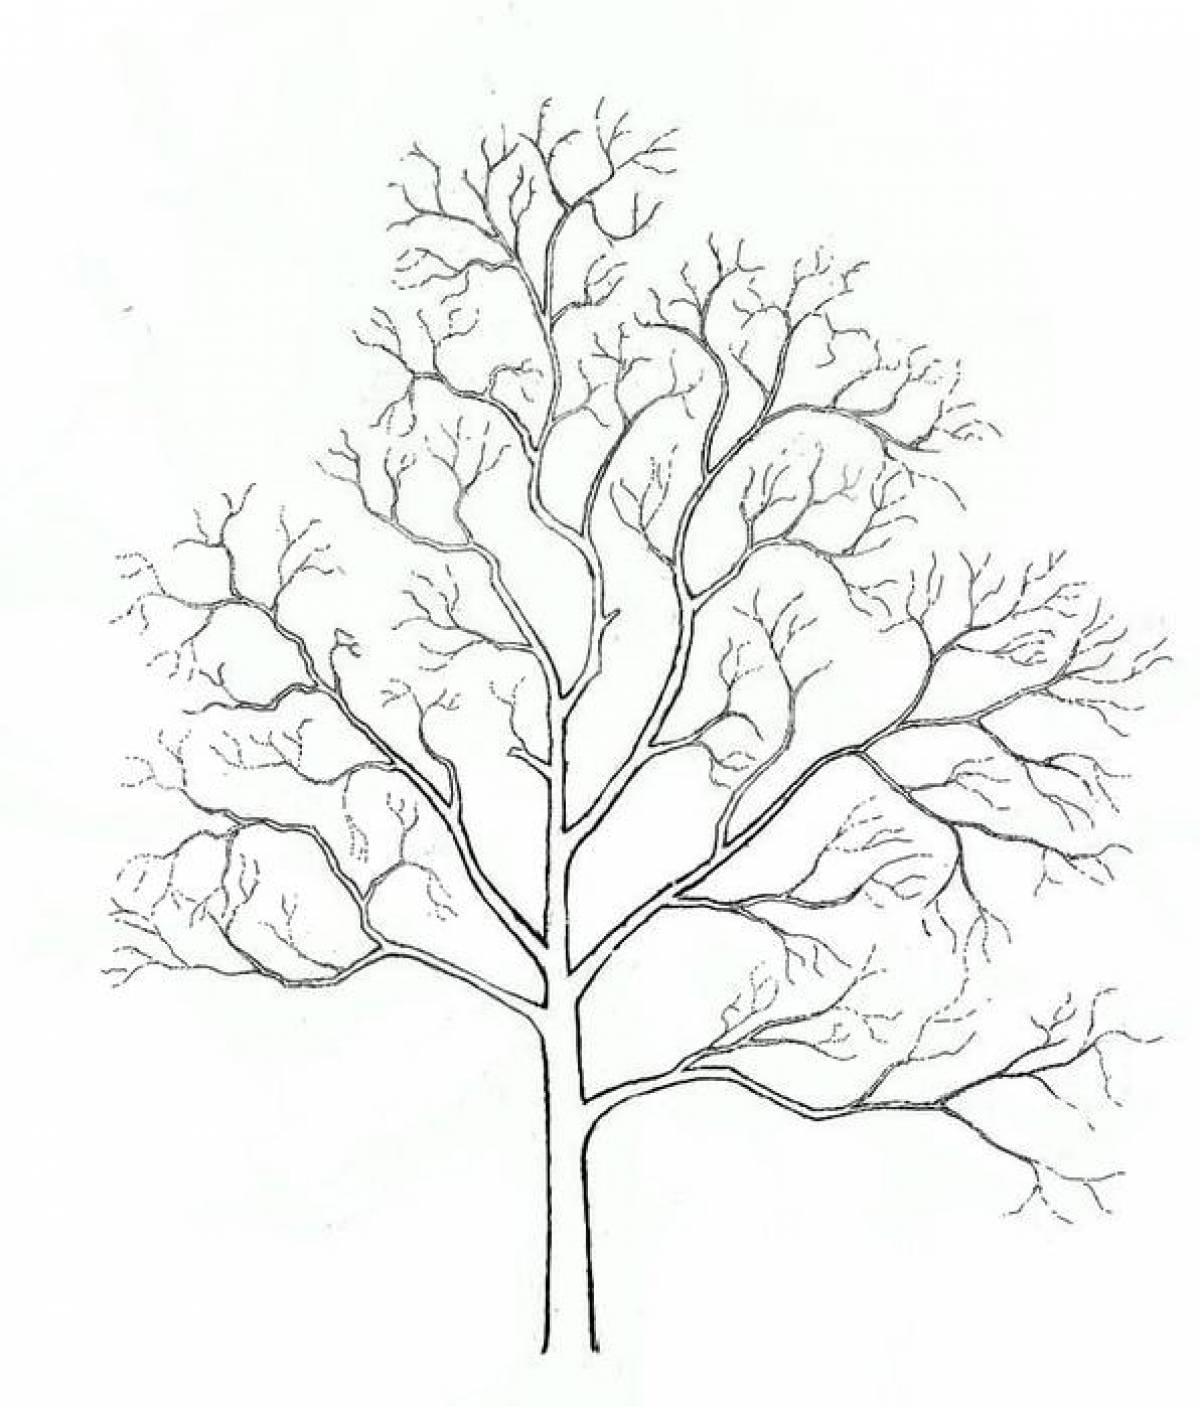 Playful tree without leaves coloring page for kids